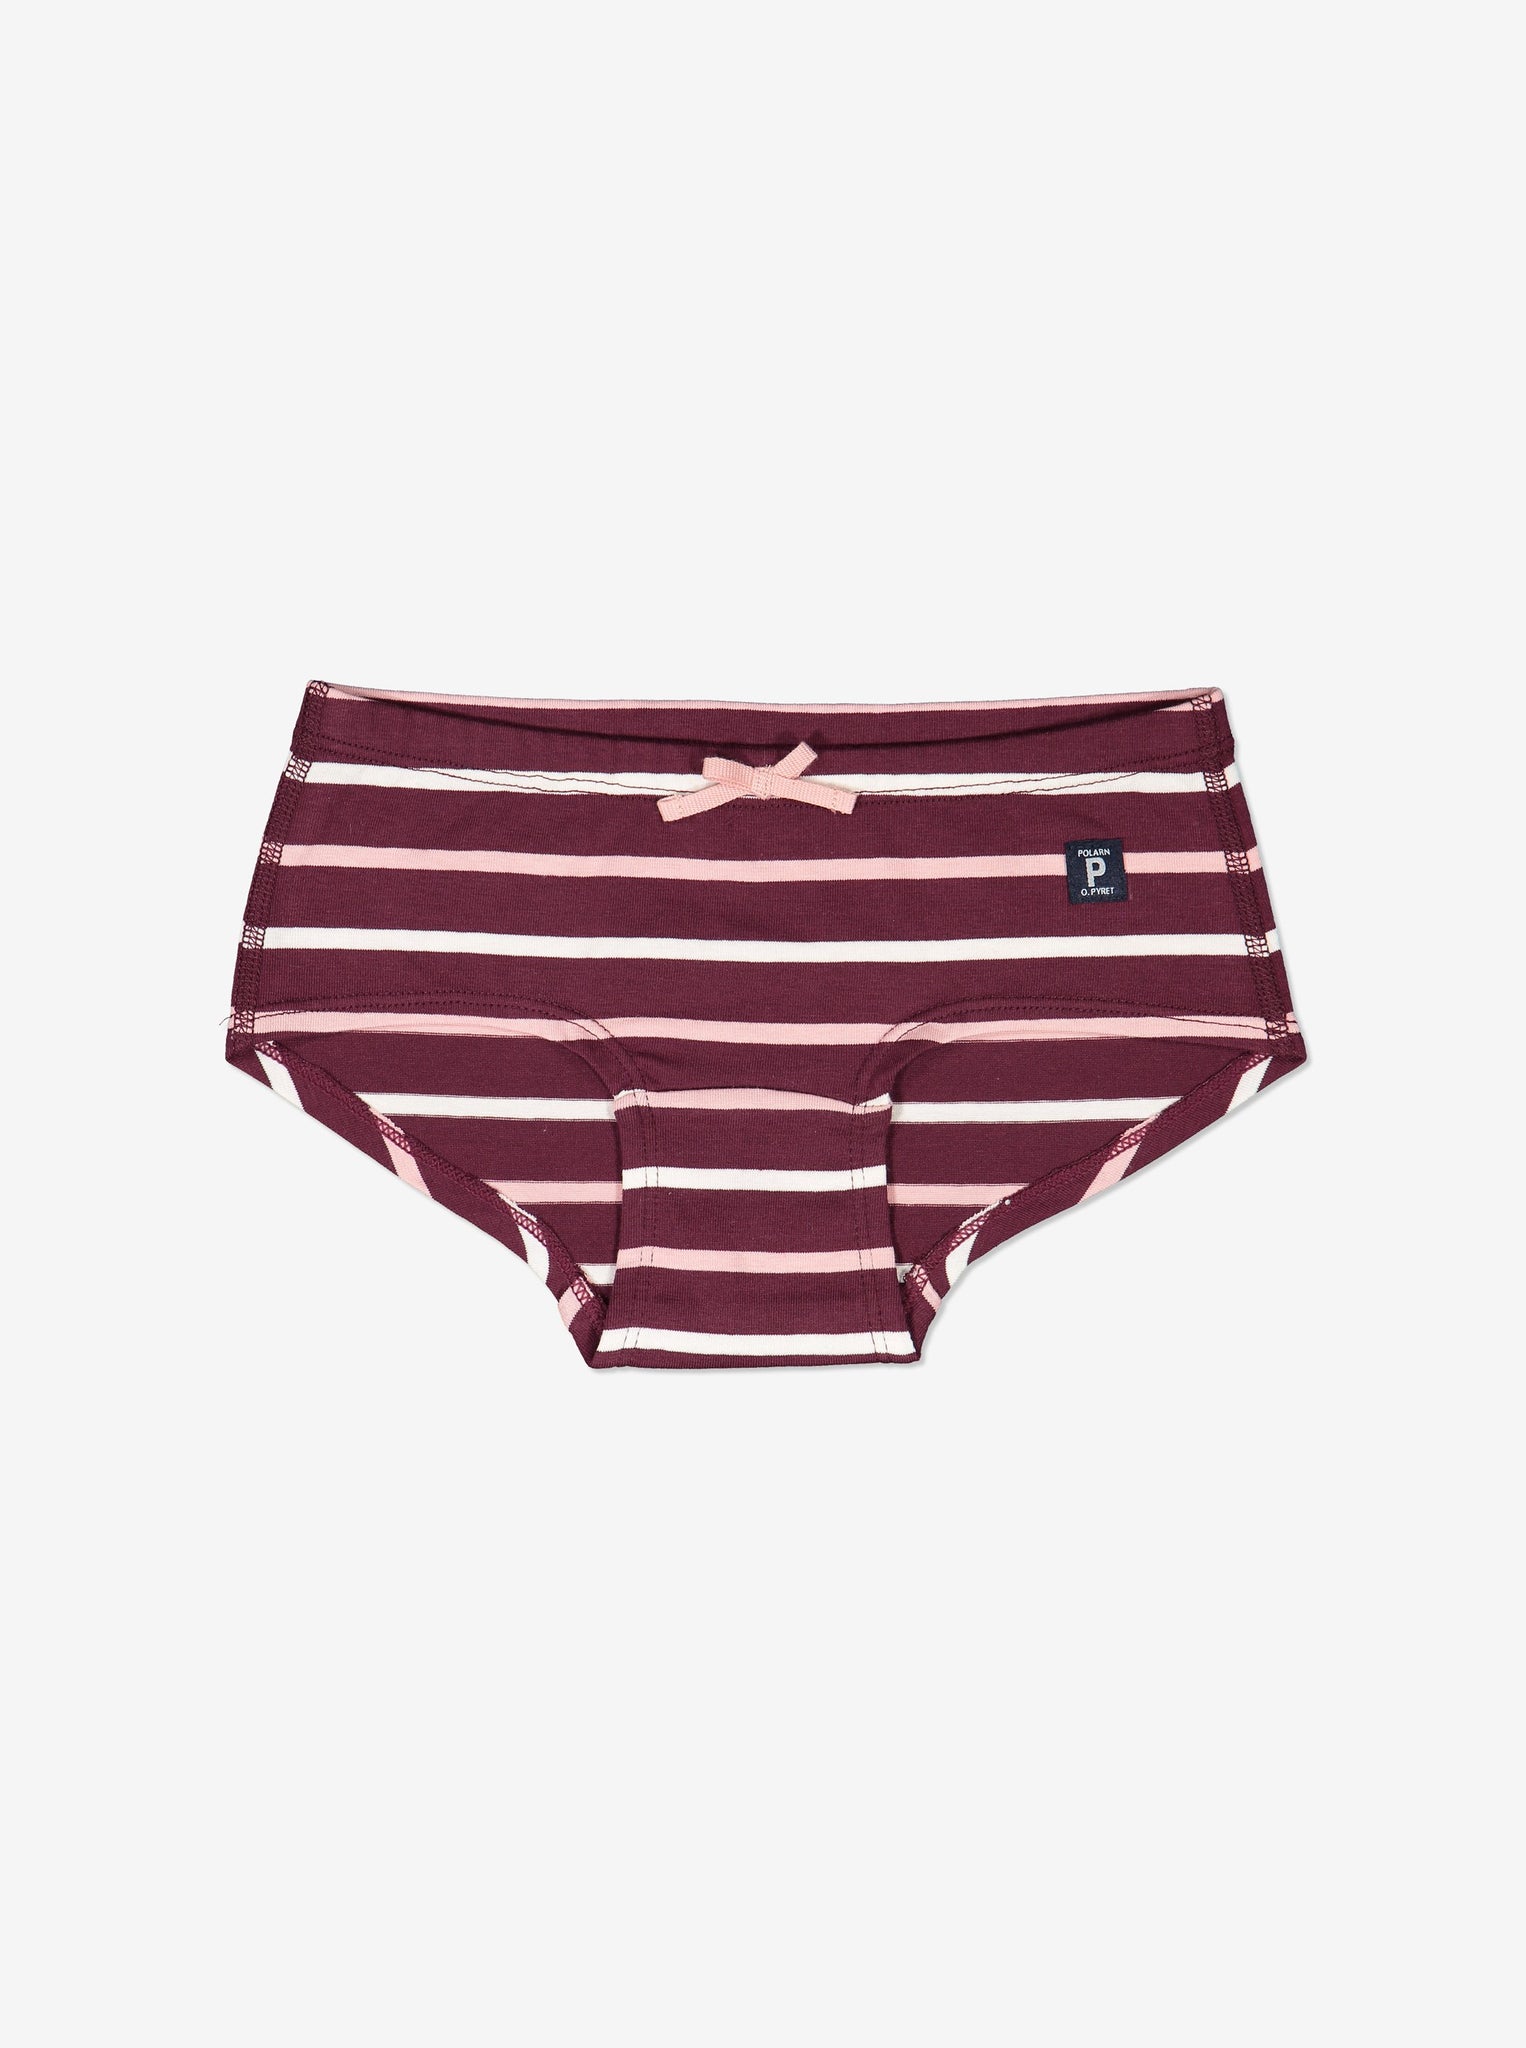 Striped Girls Cotton Knickers, Ethical Kids Clothes | Polarn O. Pyret UK